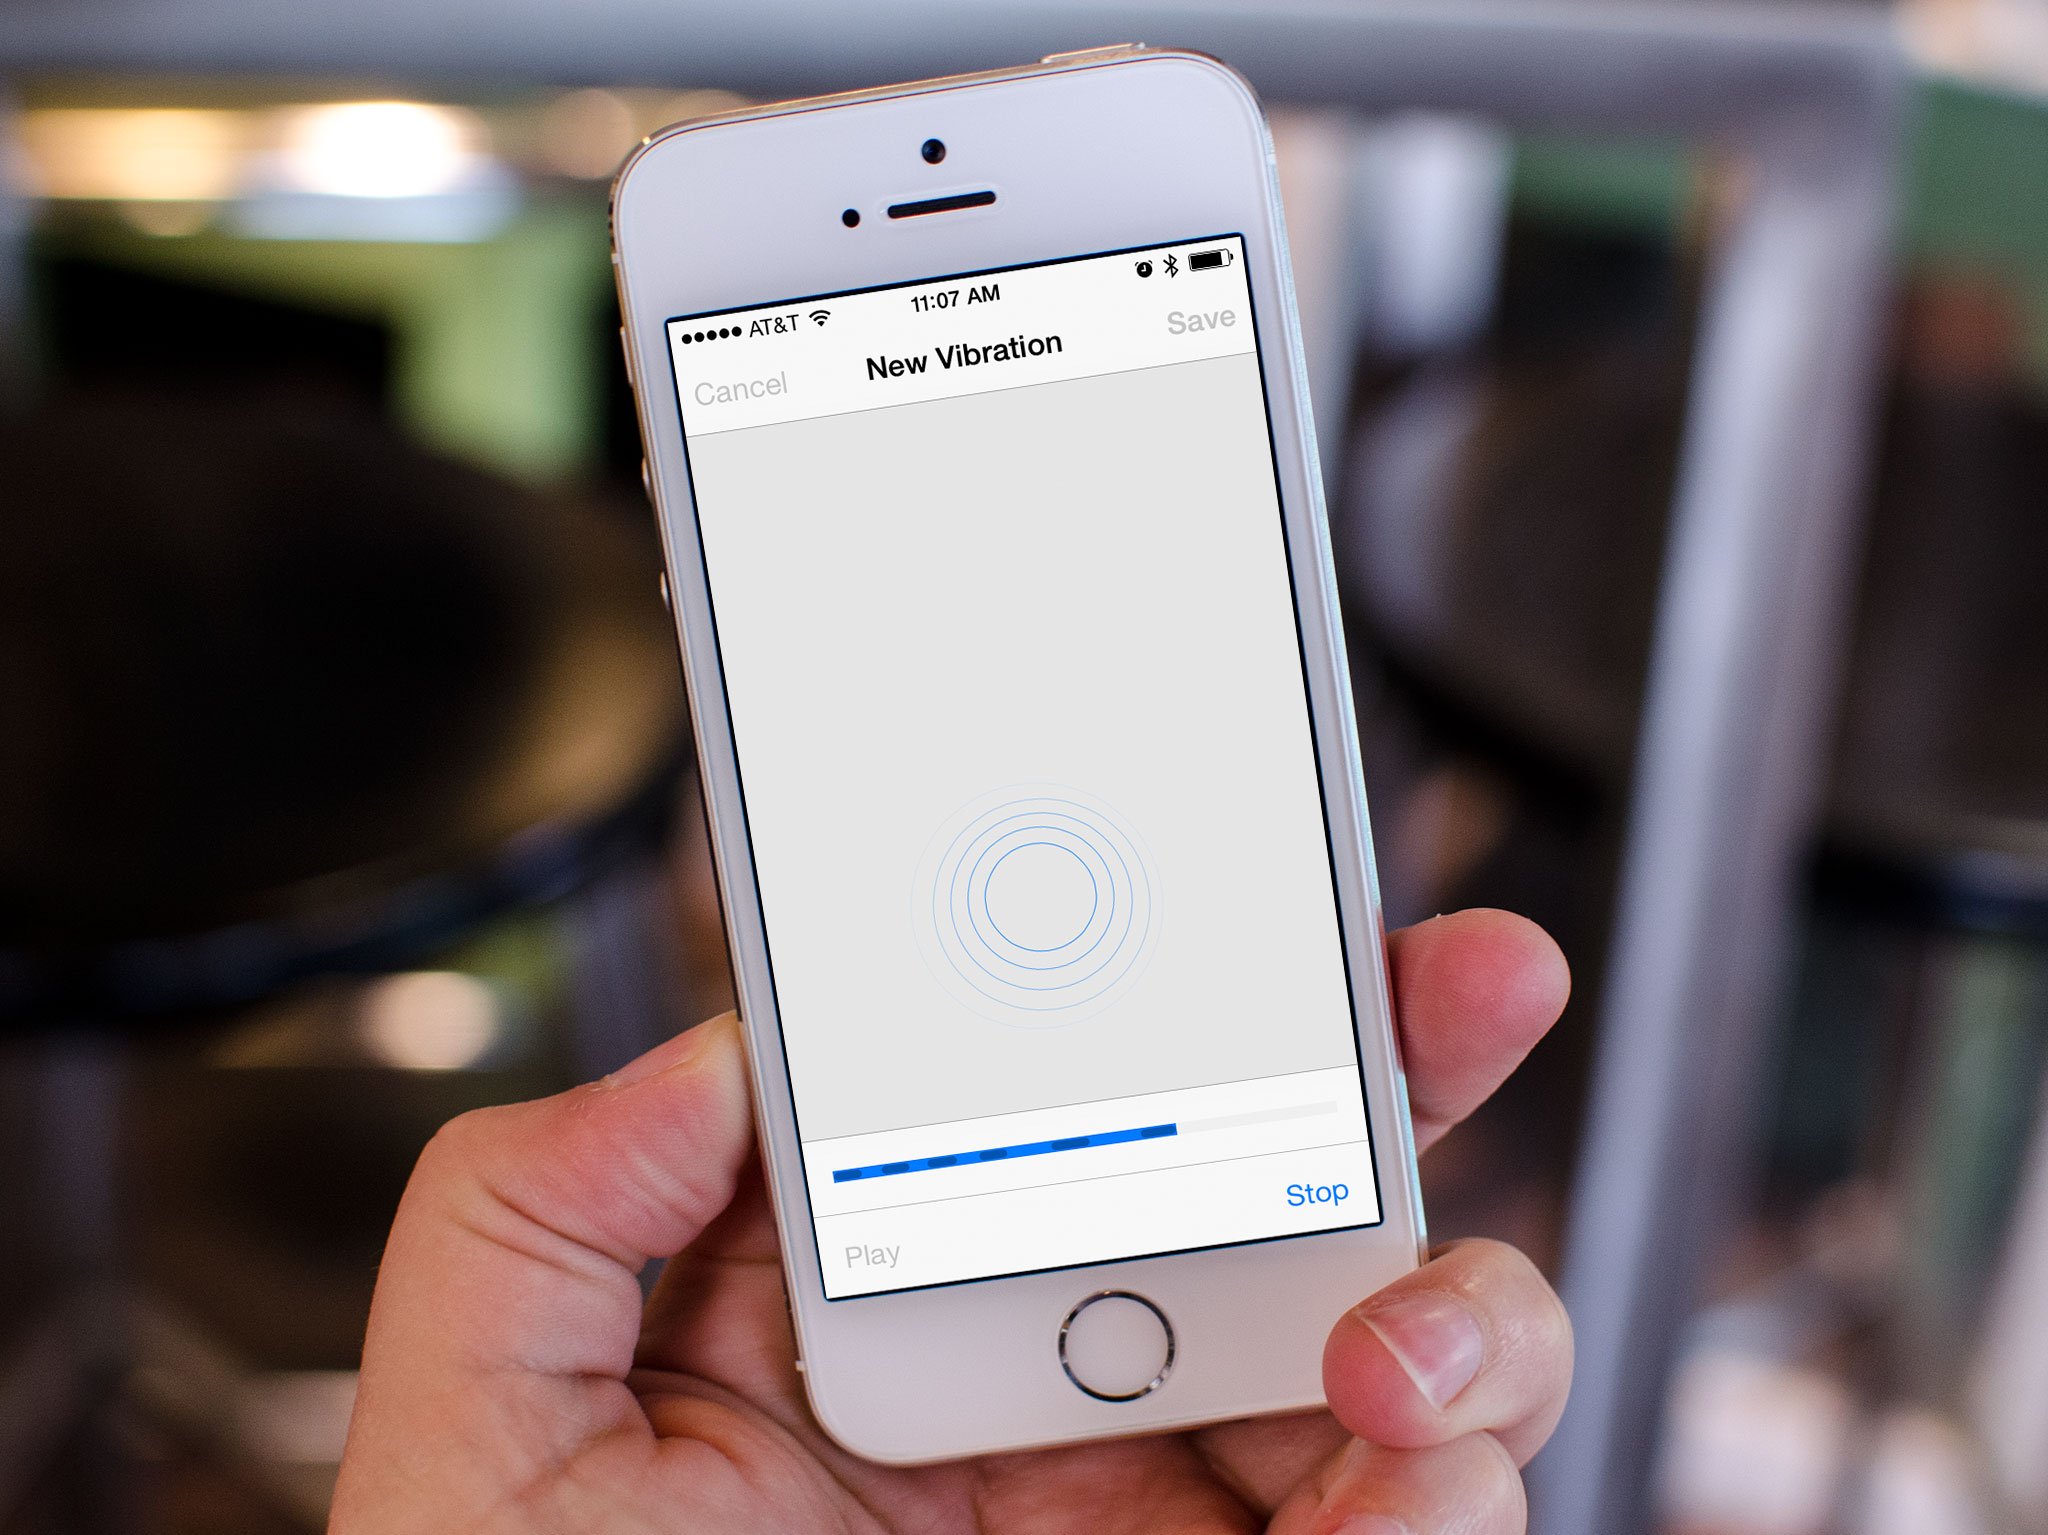 How to create and customize vibration alerts on your iPhone